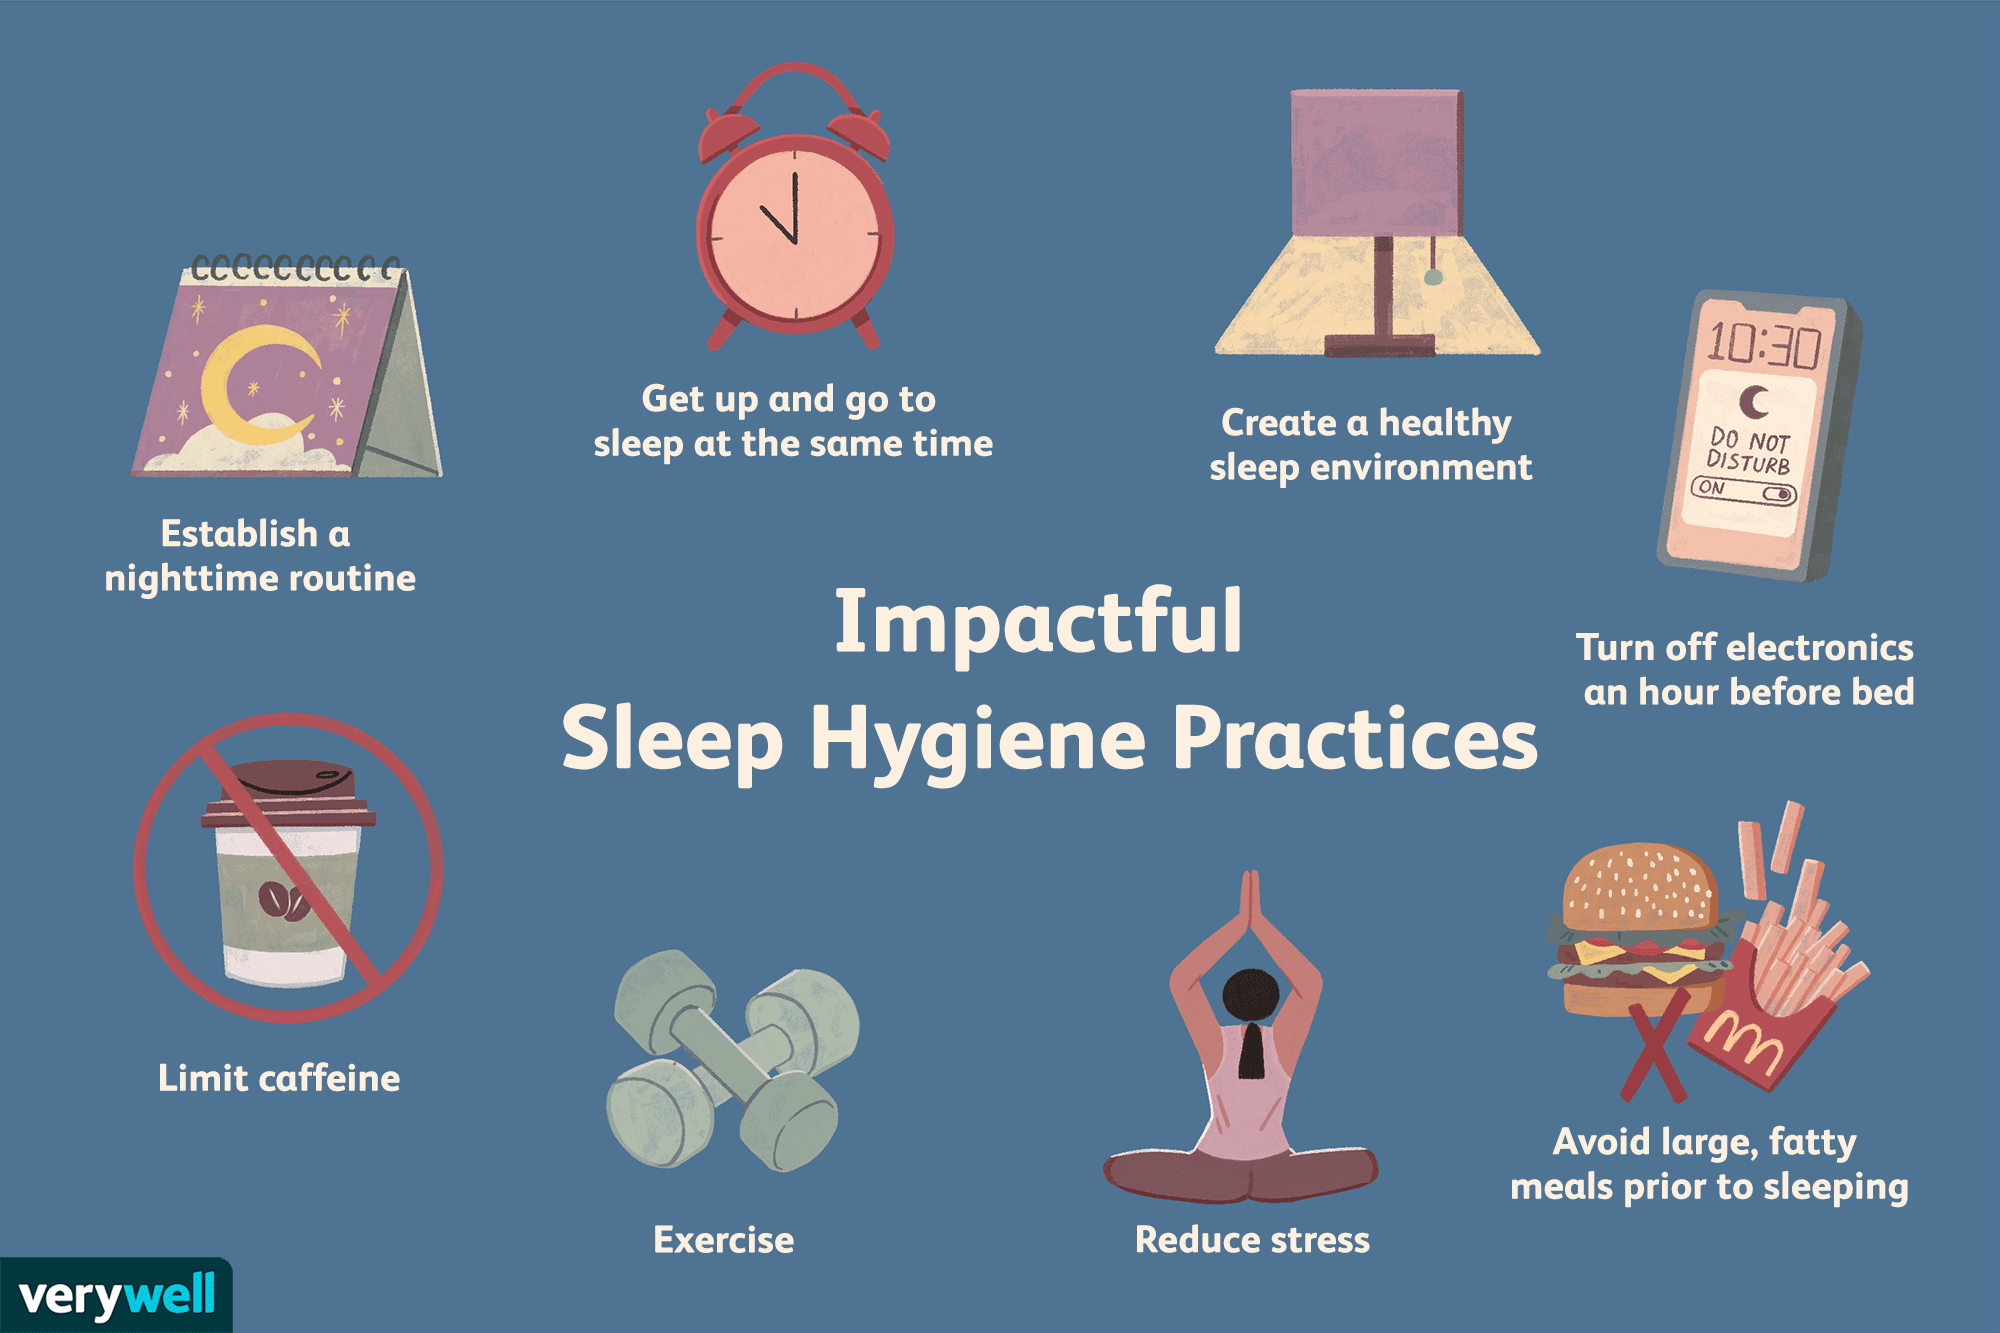 What are the common sleep hygiene practices?